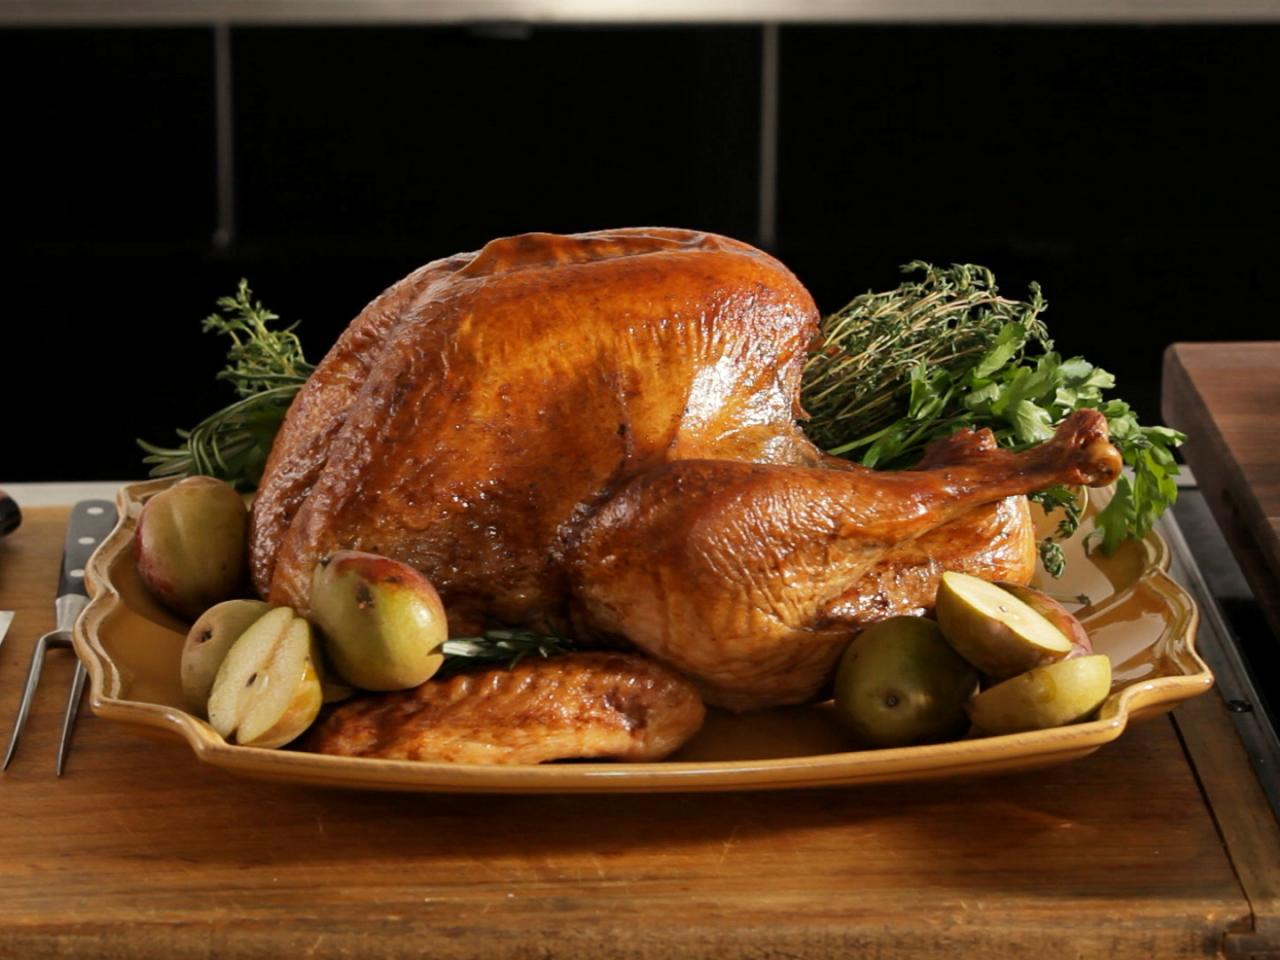 6 Things To Do Before You Carve the Turkey